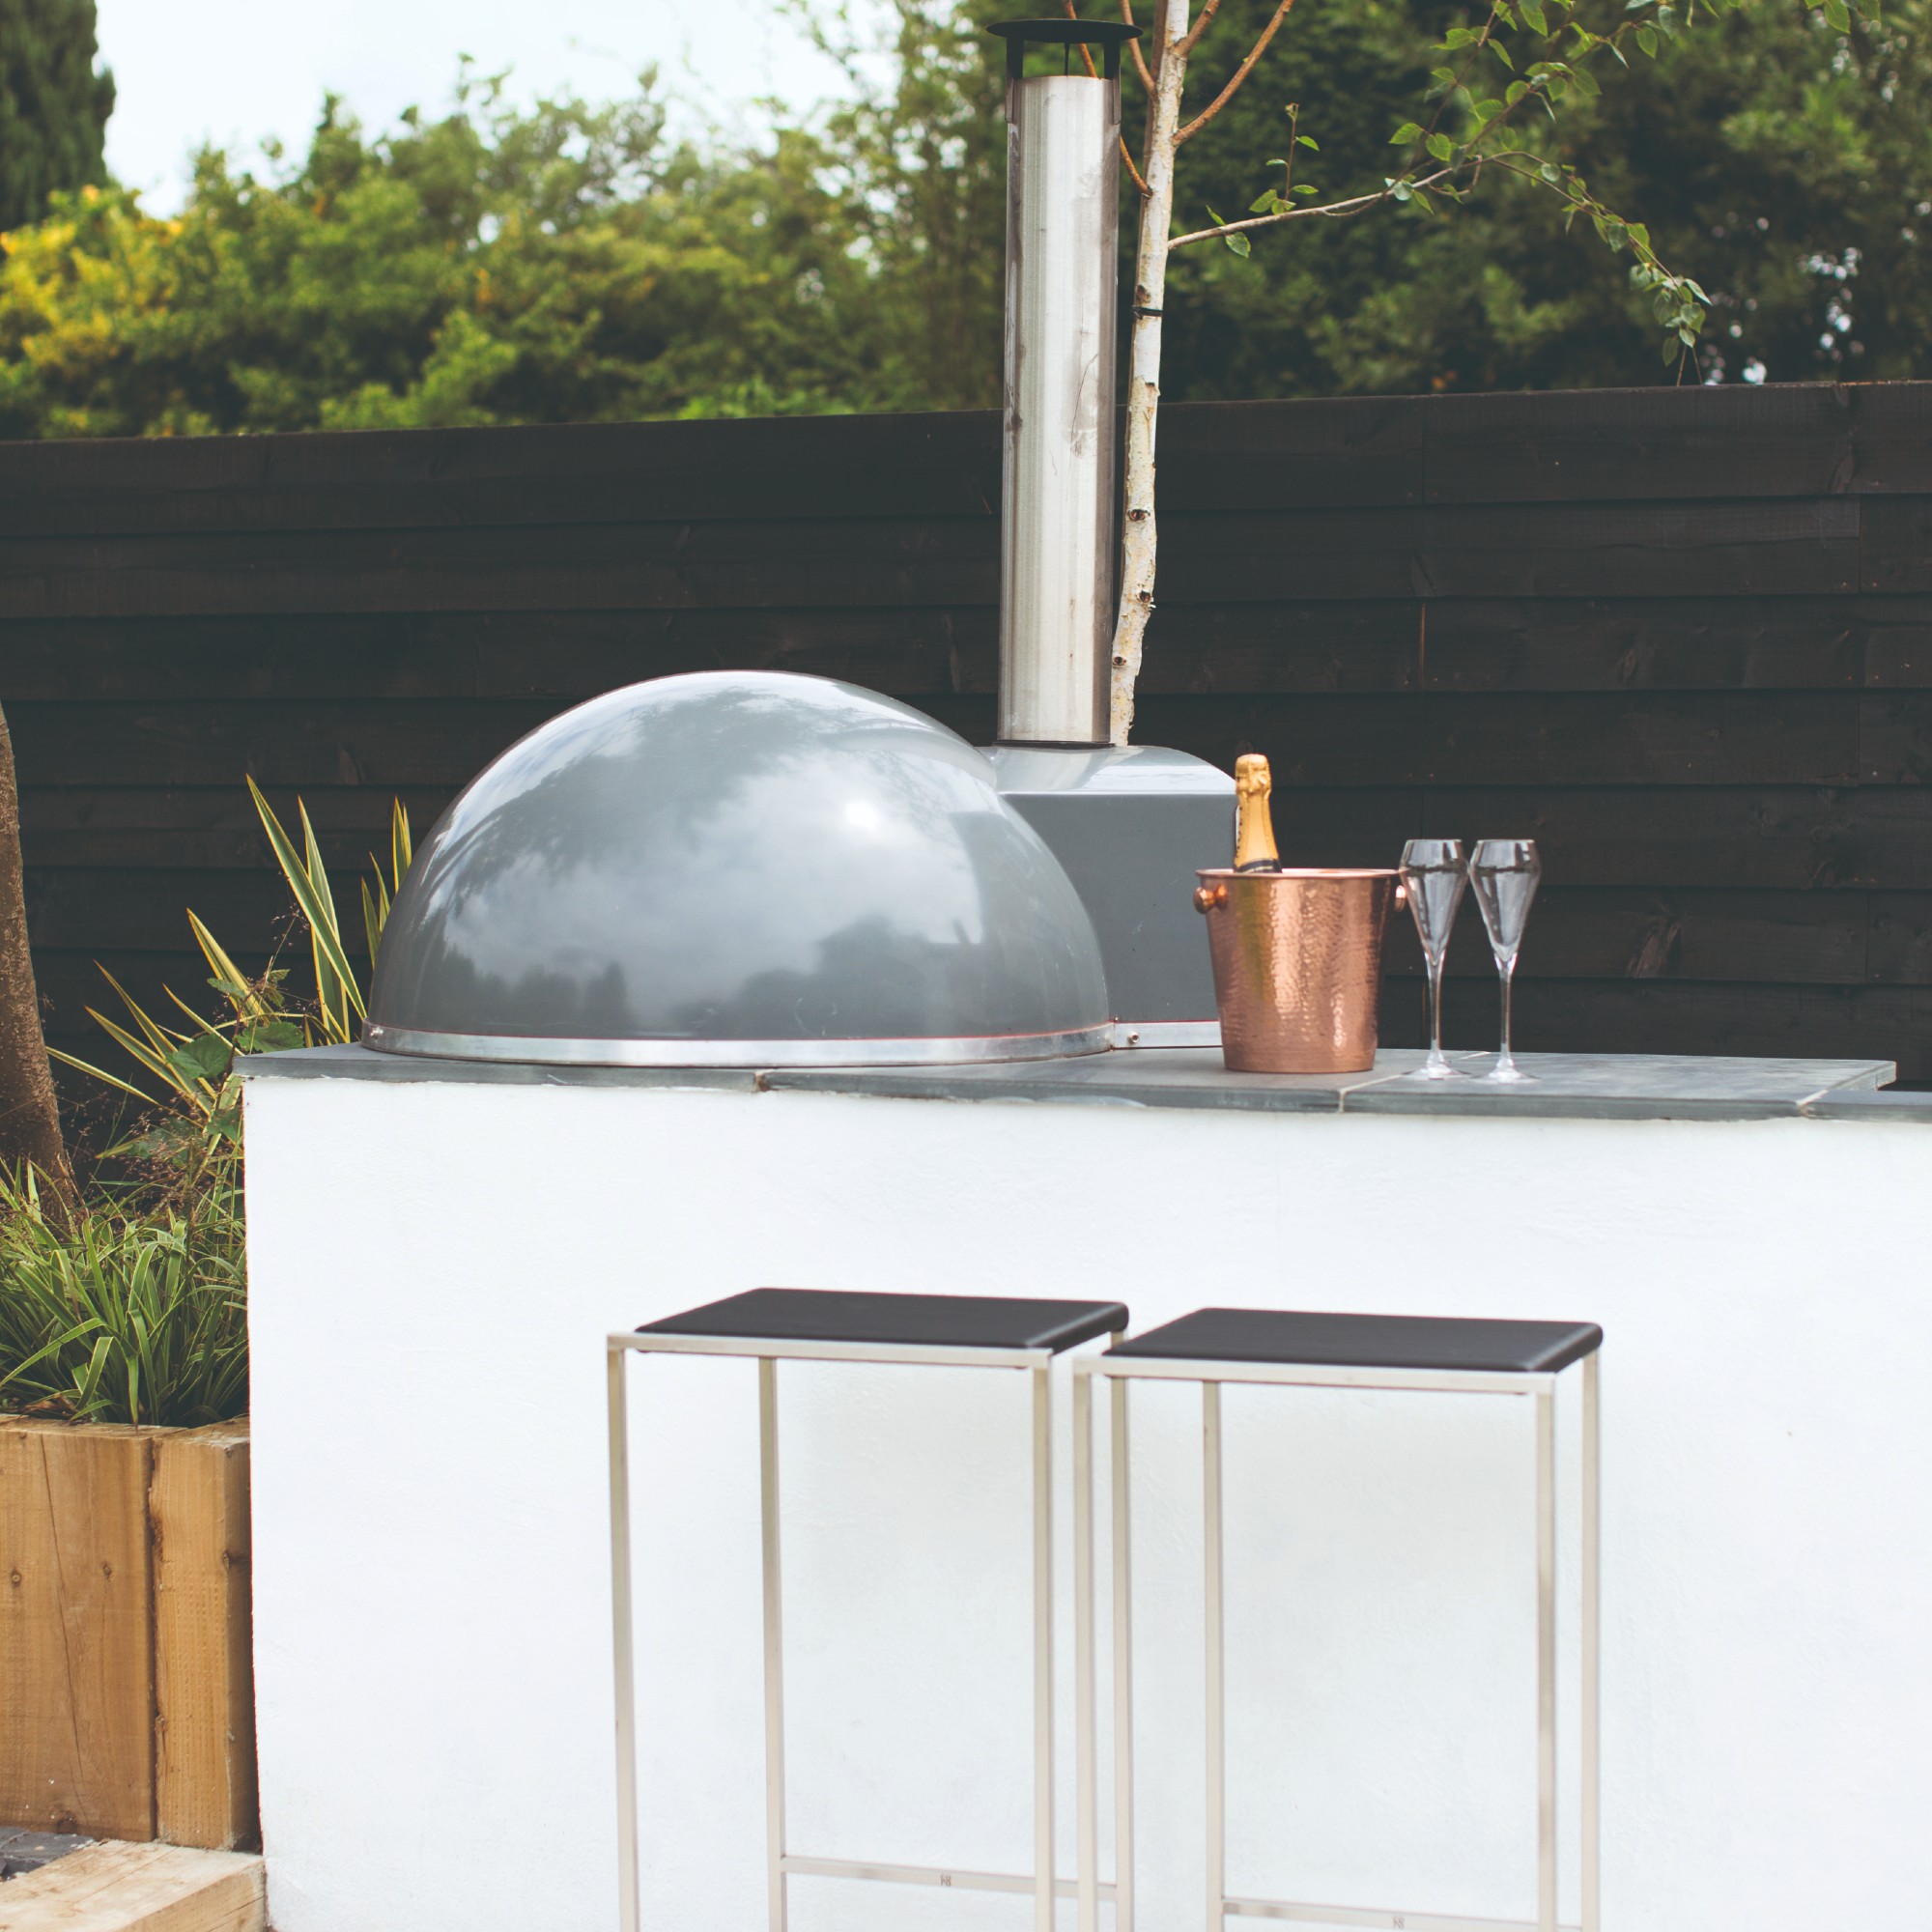 An outdoor kitchen in the garden with seating bar stools